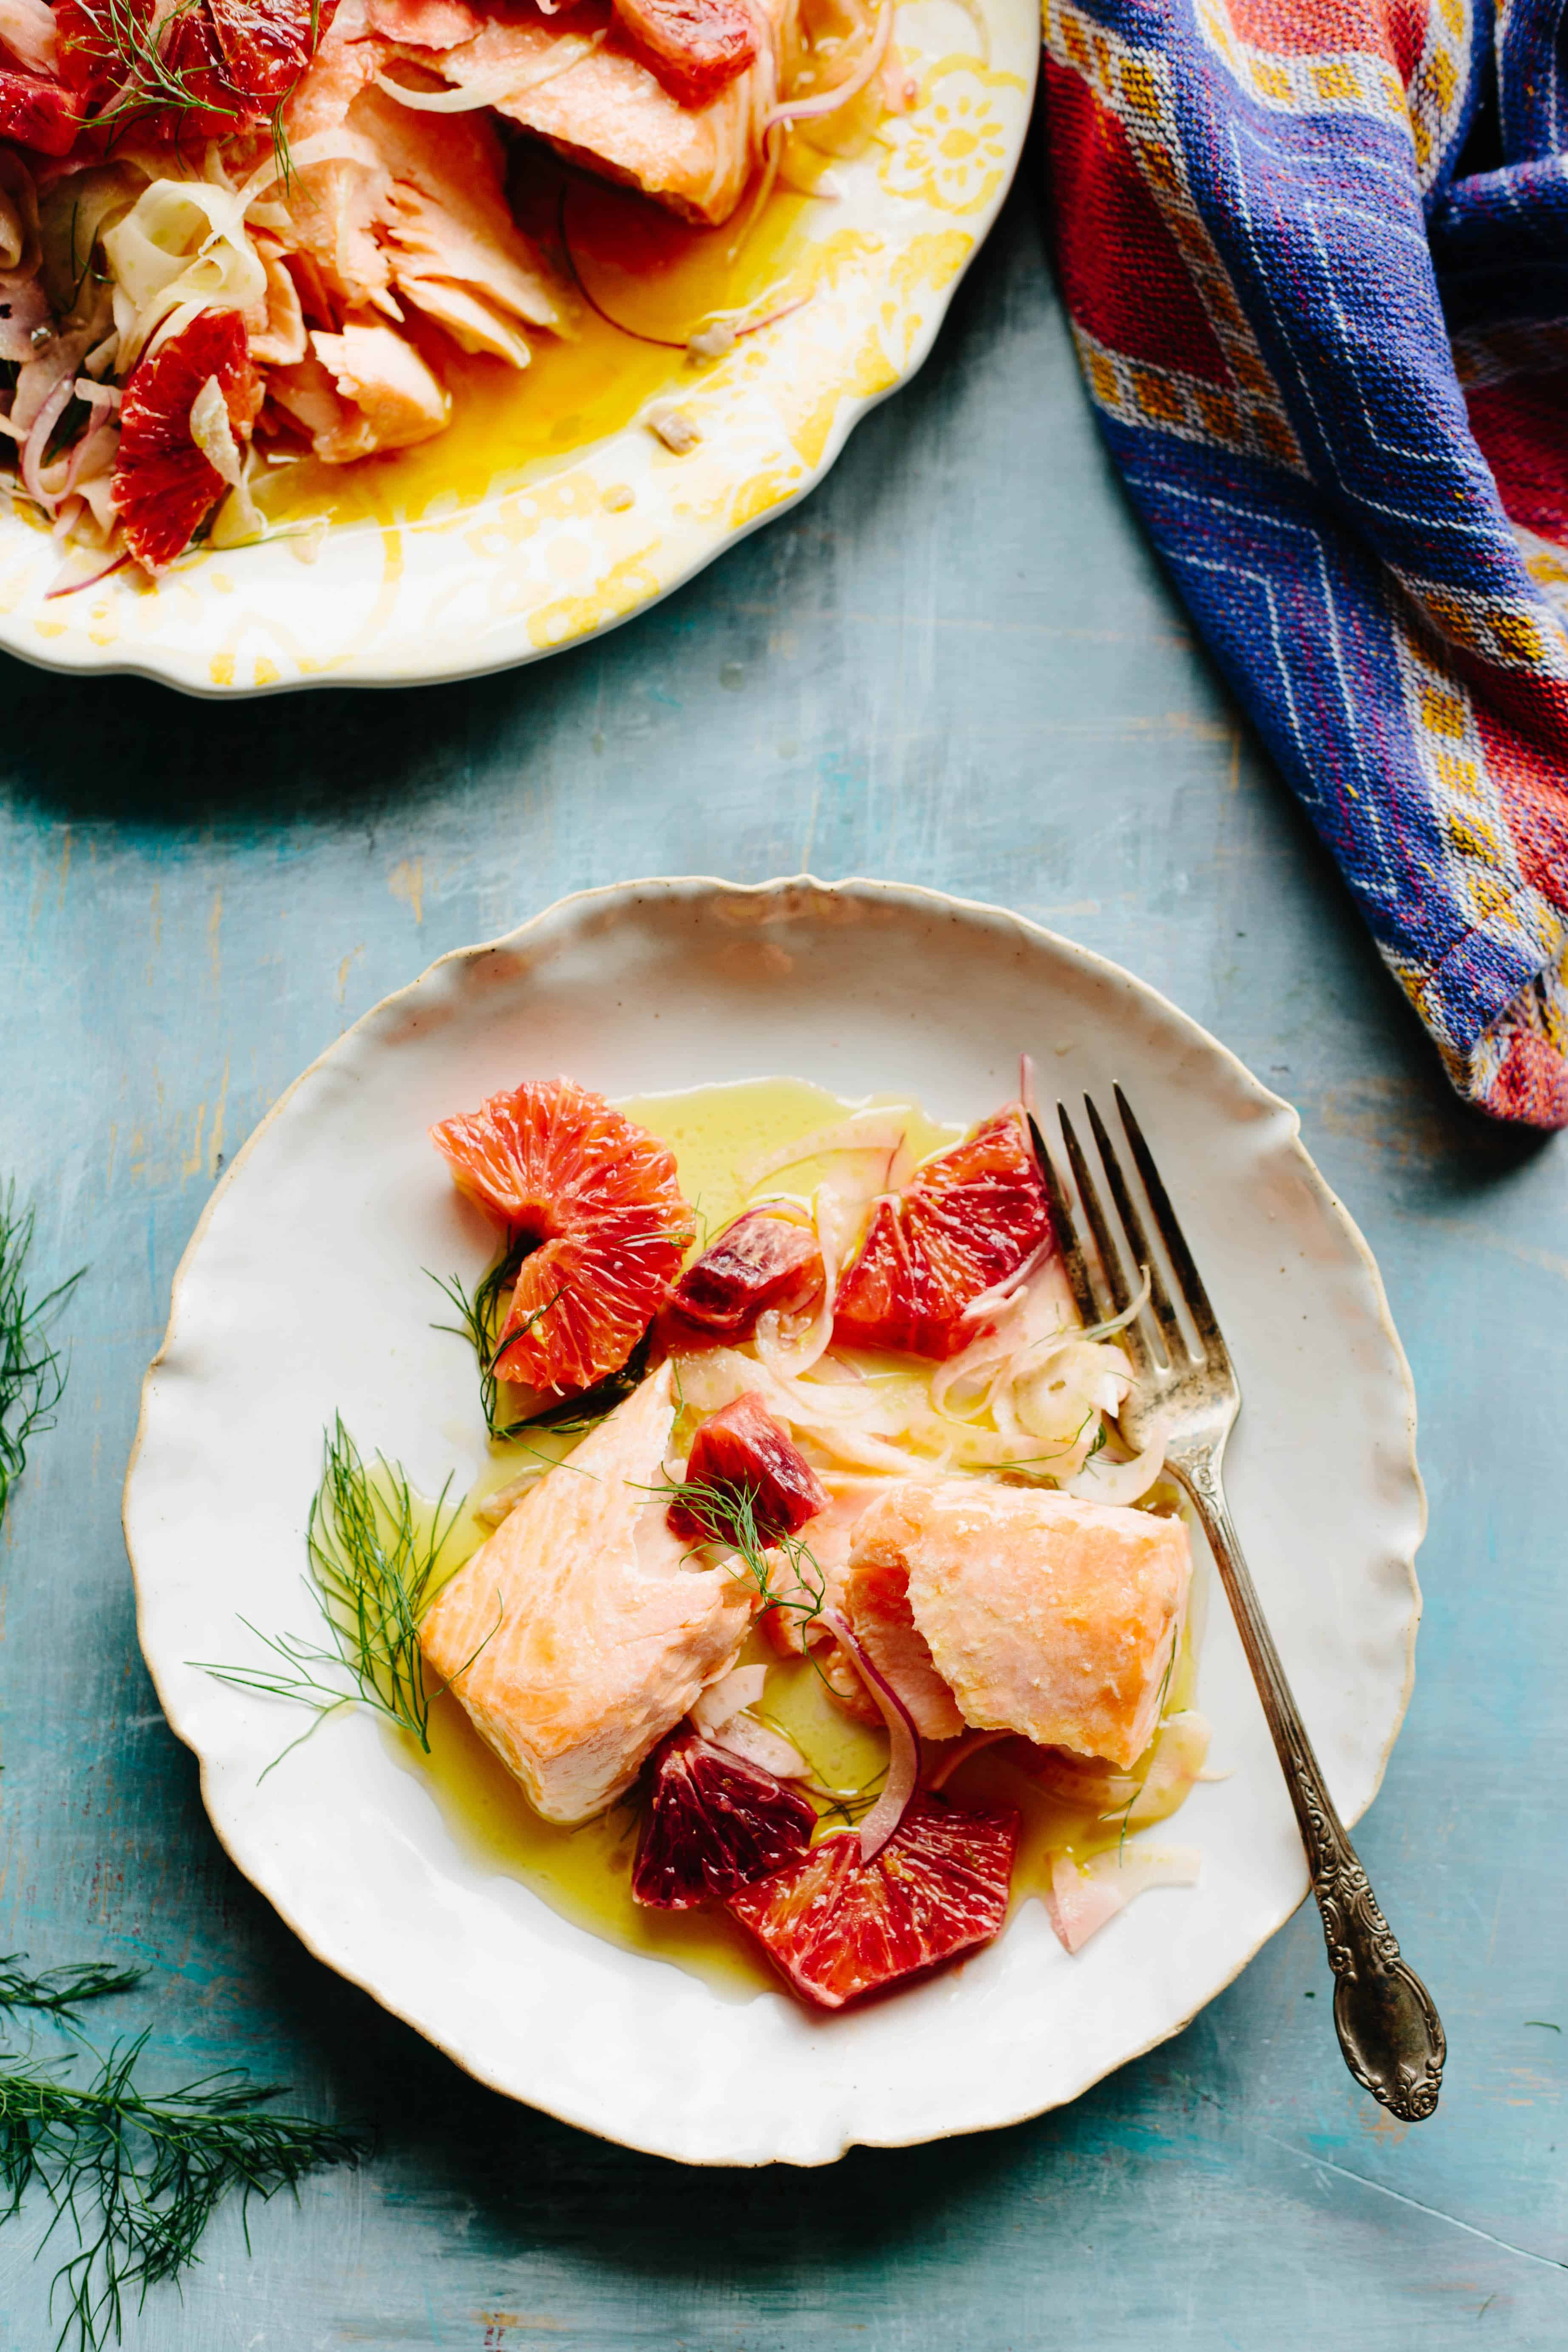 Dinner plate with salmon, citrus, and herbs next to a fork.